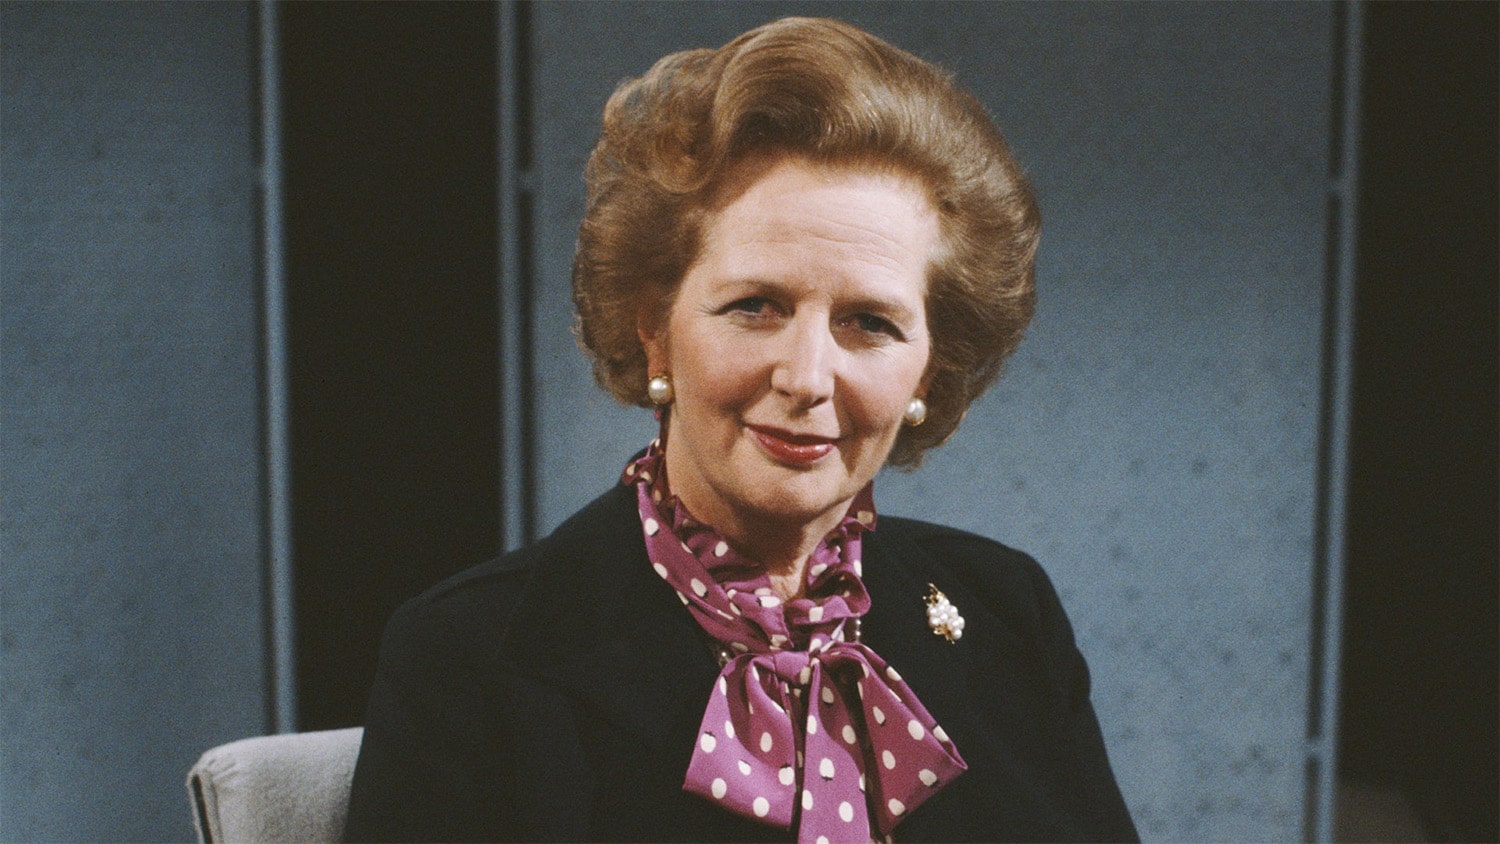 20 interesting facts about Margaret Thatcher